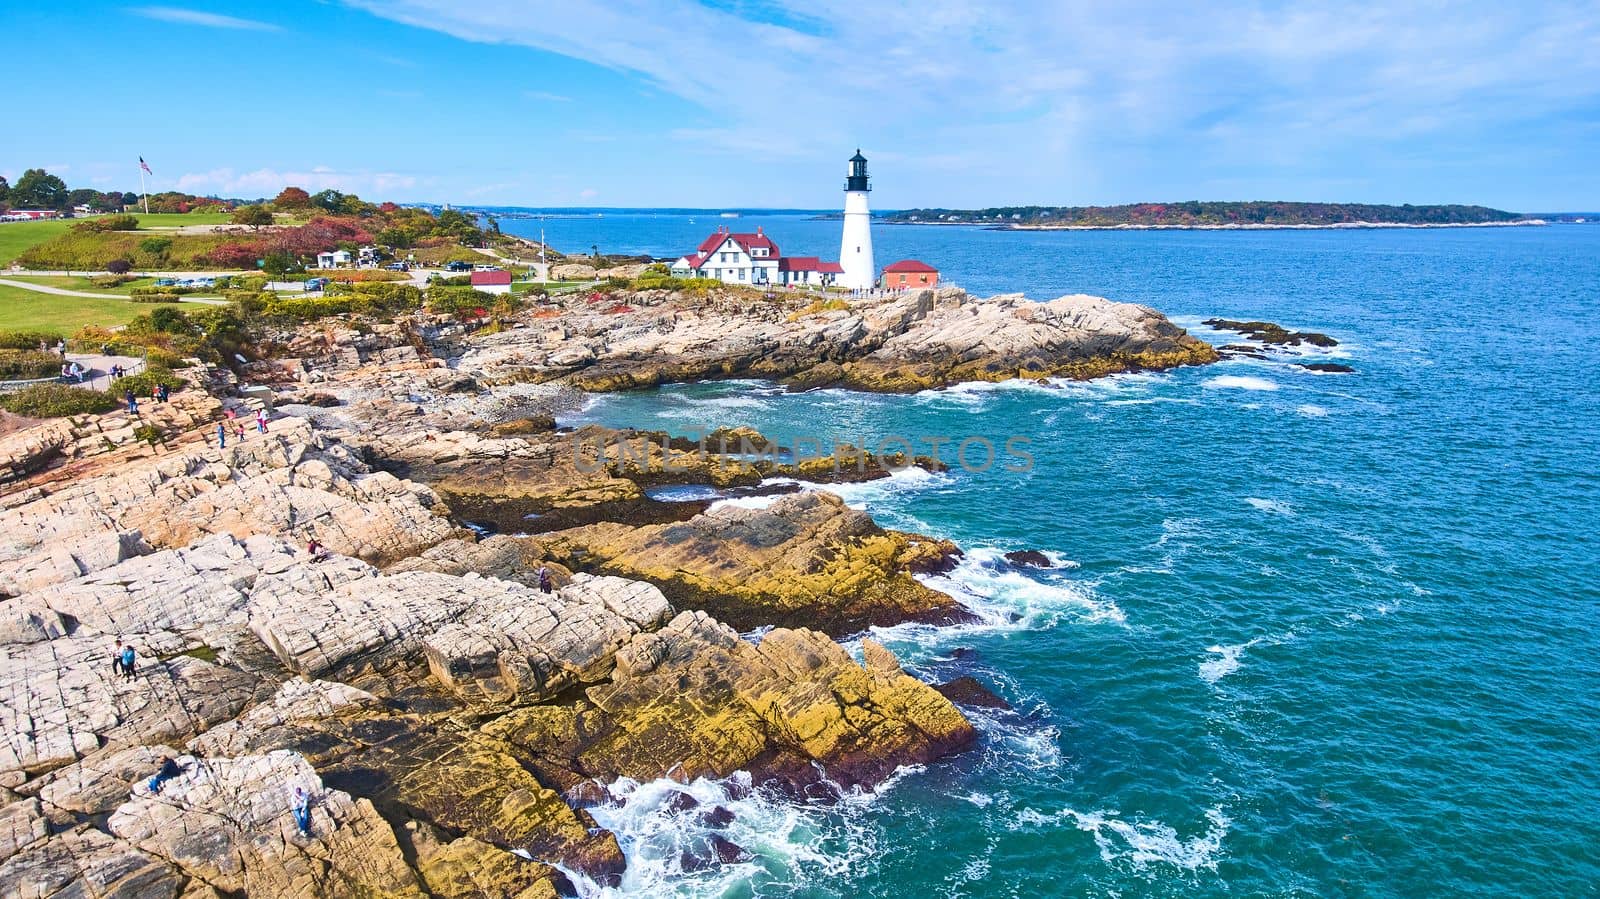 Image of Lighthouse rests on stunning rocky Maine coastline from aerial view